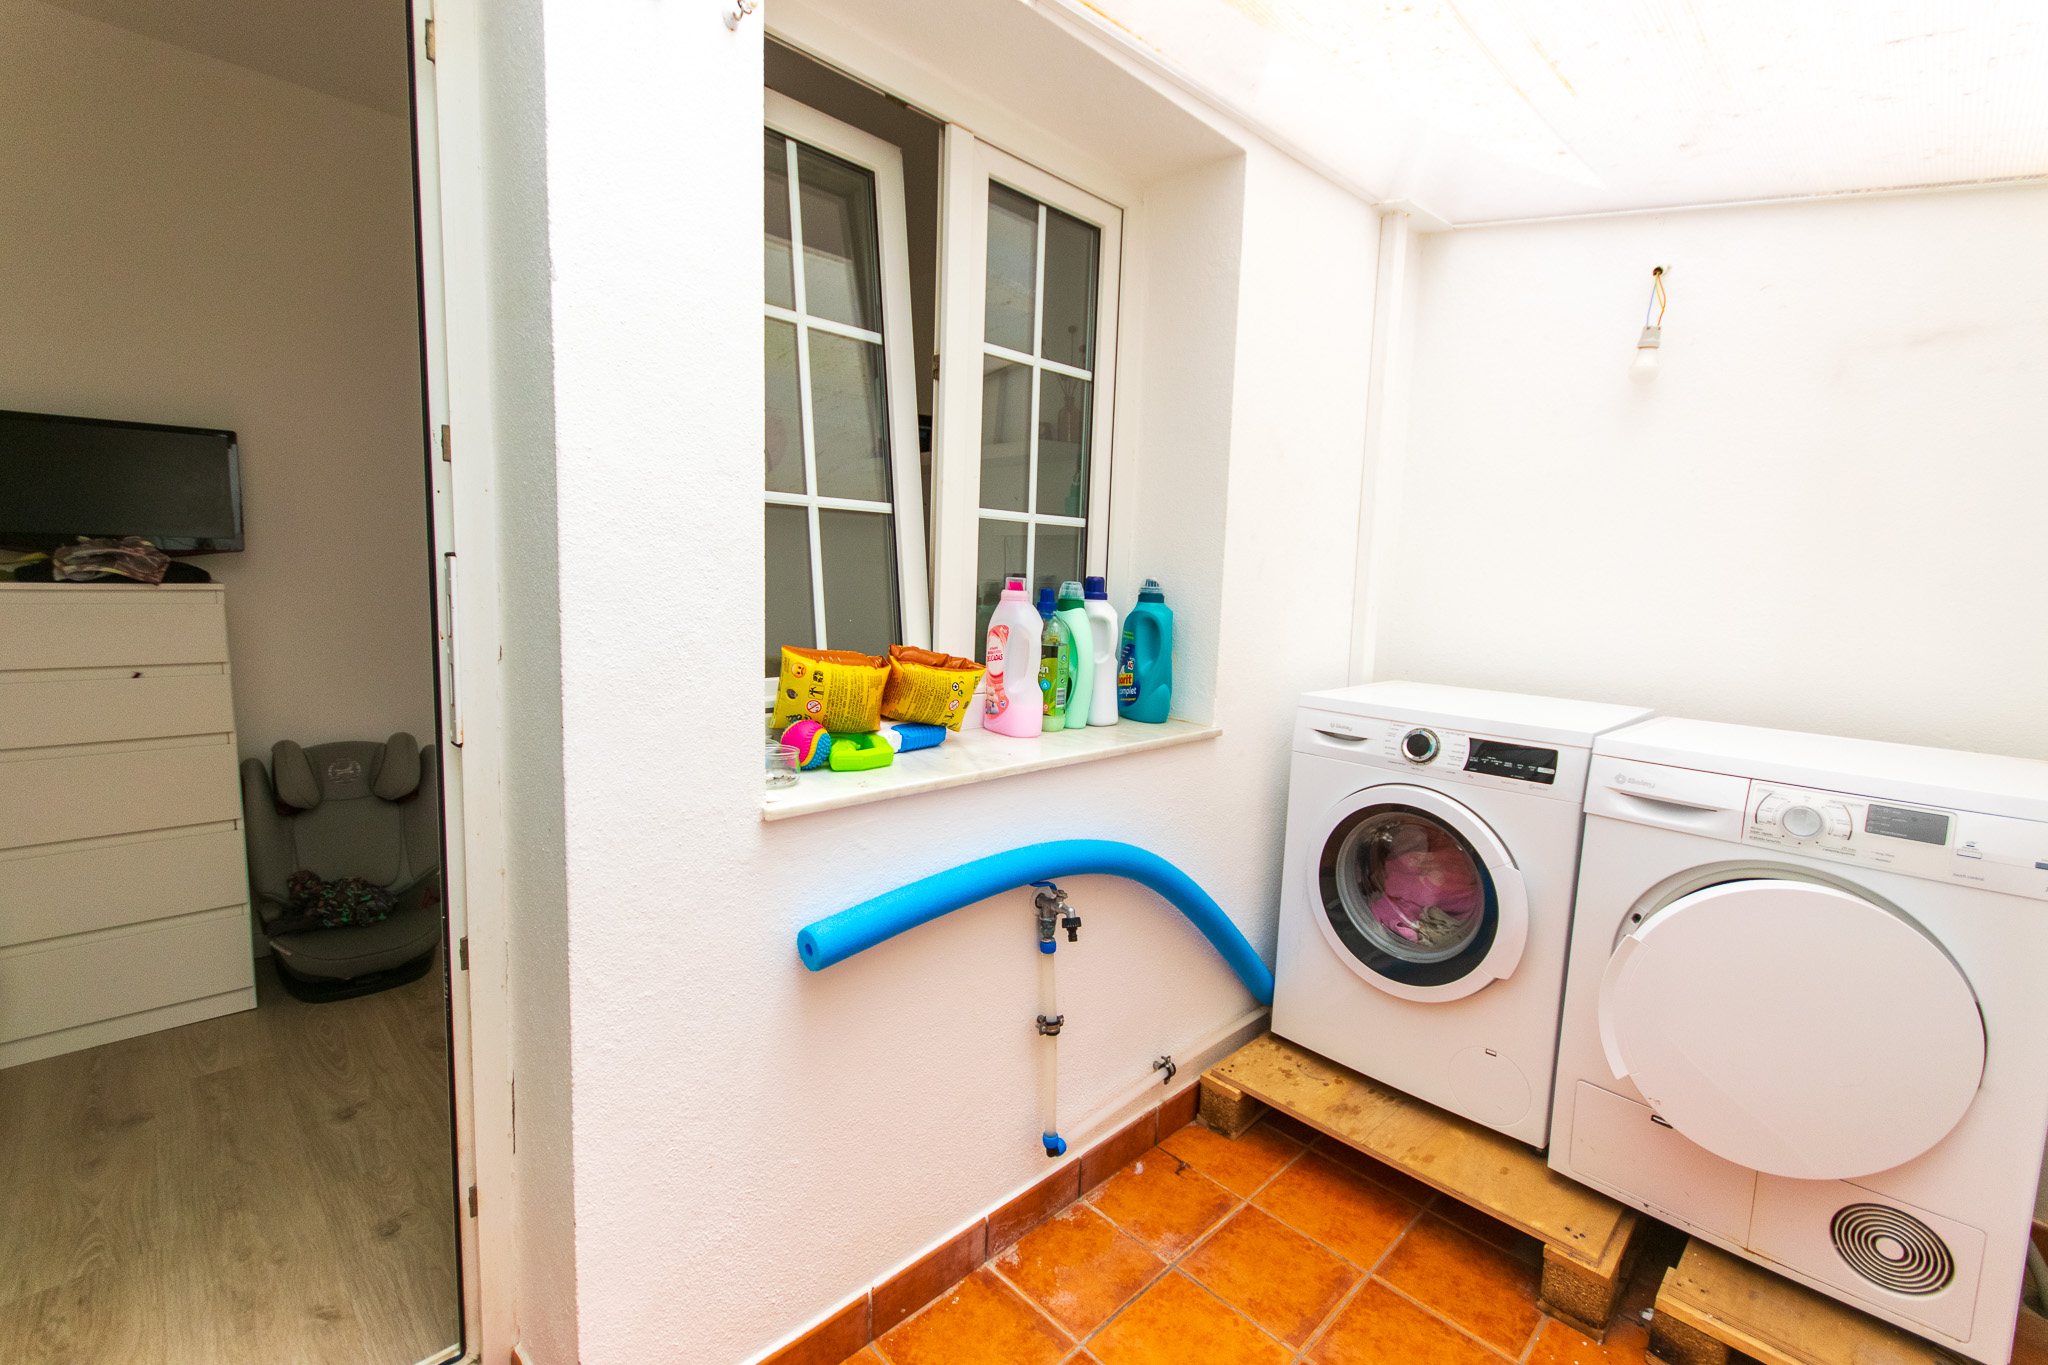 Patio with duplex laundry room with large terrace in Mercadal